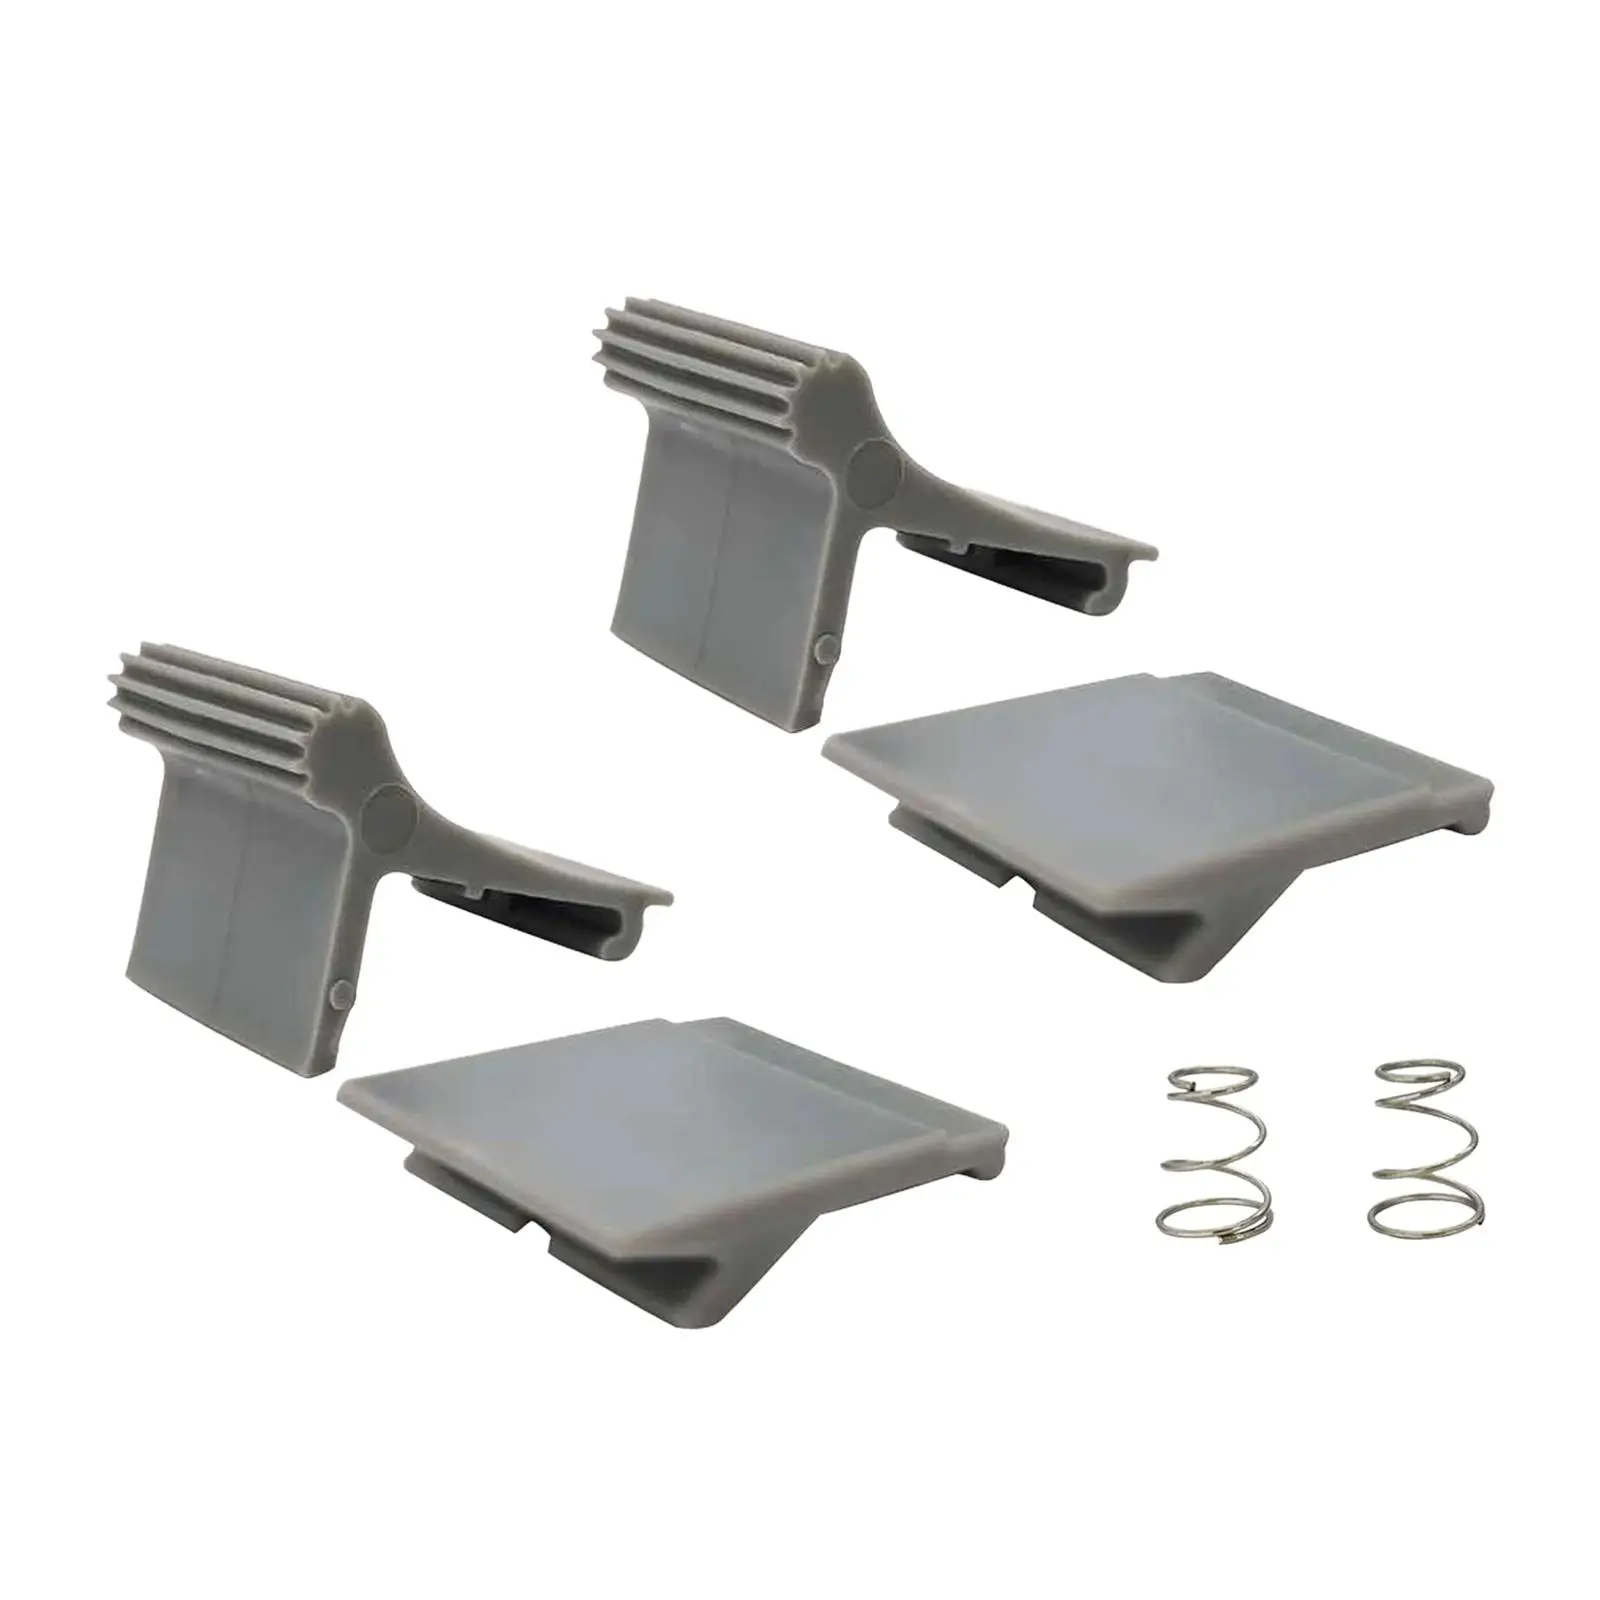 Awning Arm Slider Catch Set Assembly Accessories for Camper RV Trailer